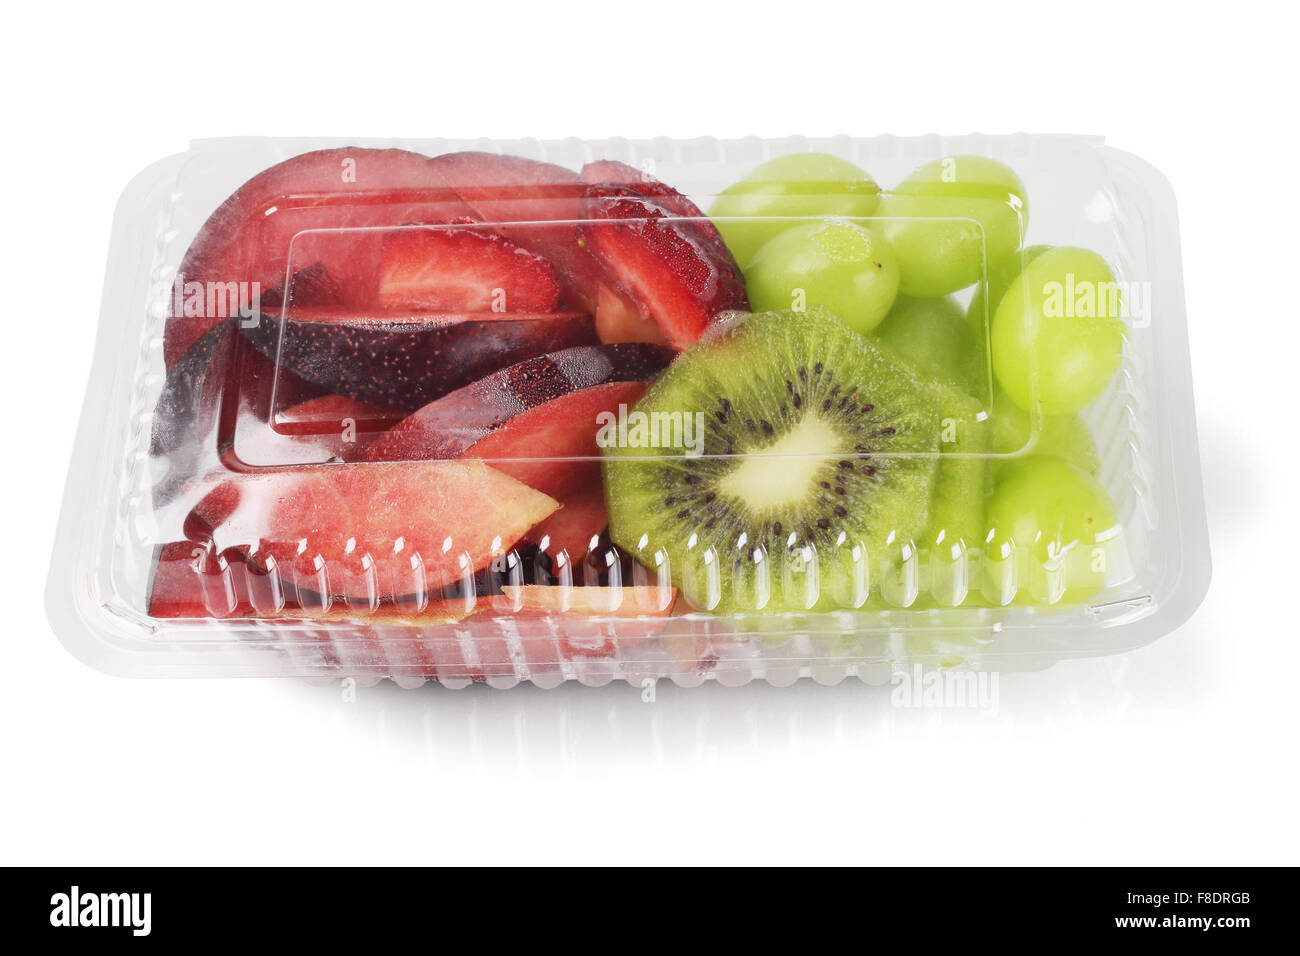 Mixed Cut Fruits in Plastic Box on White Background Stock Photo